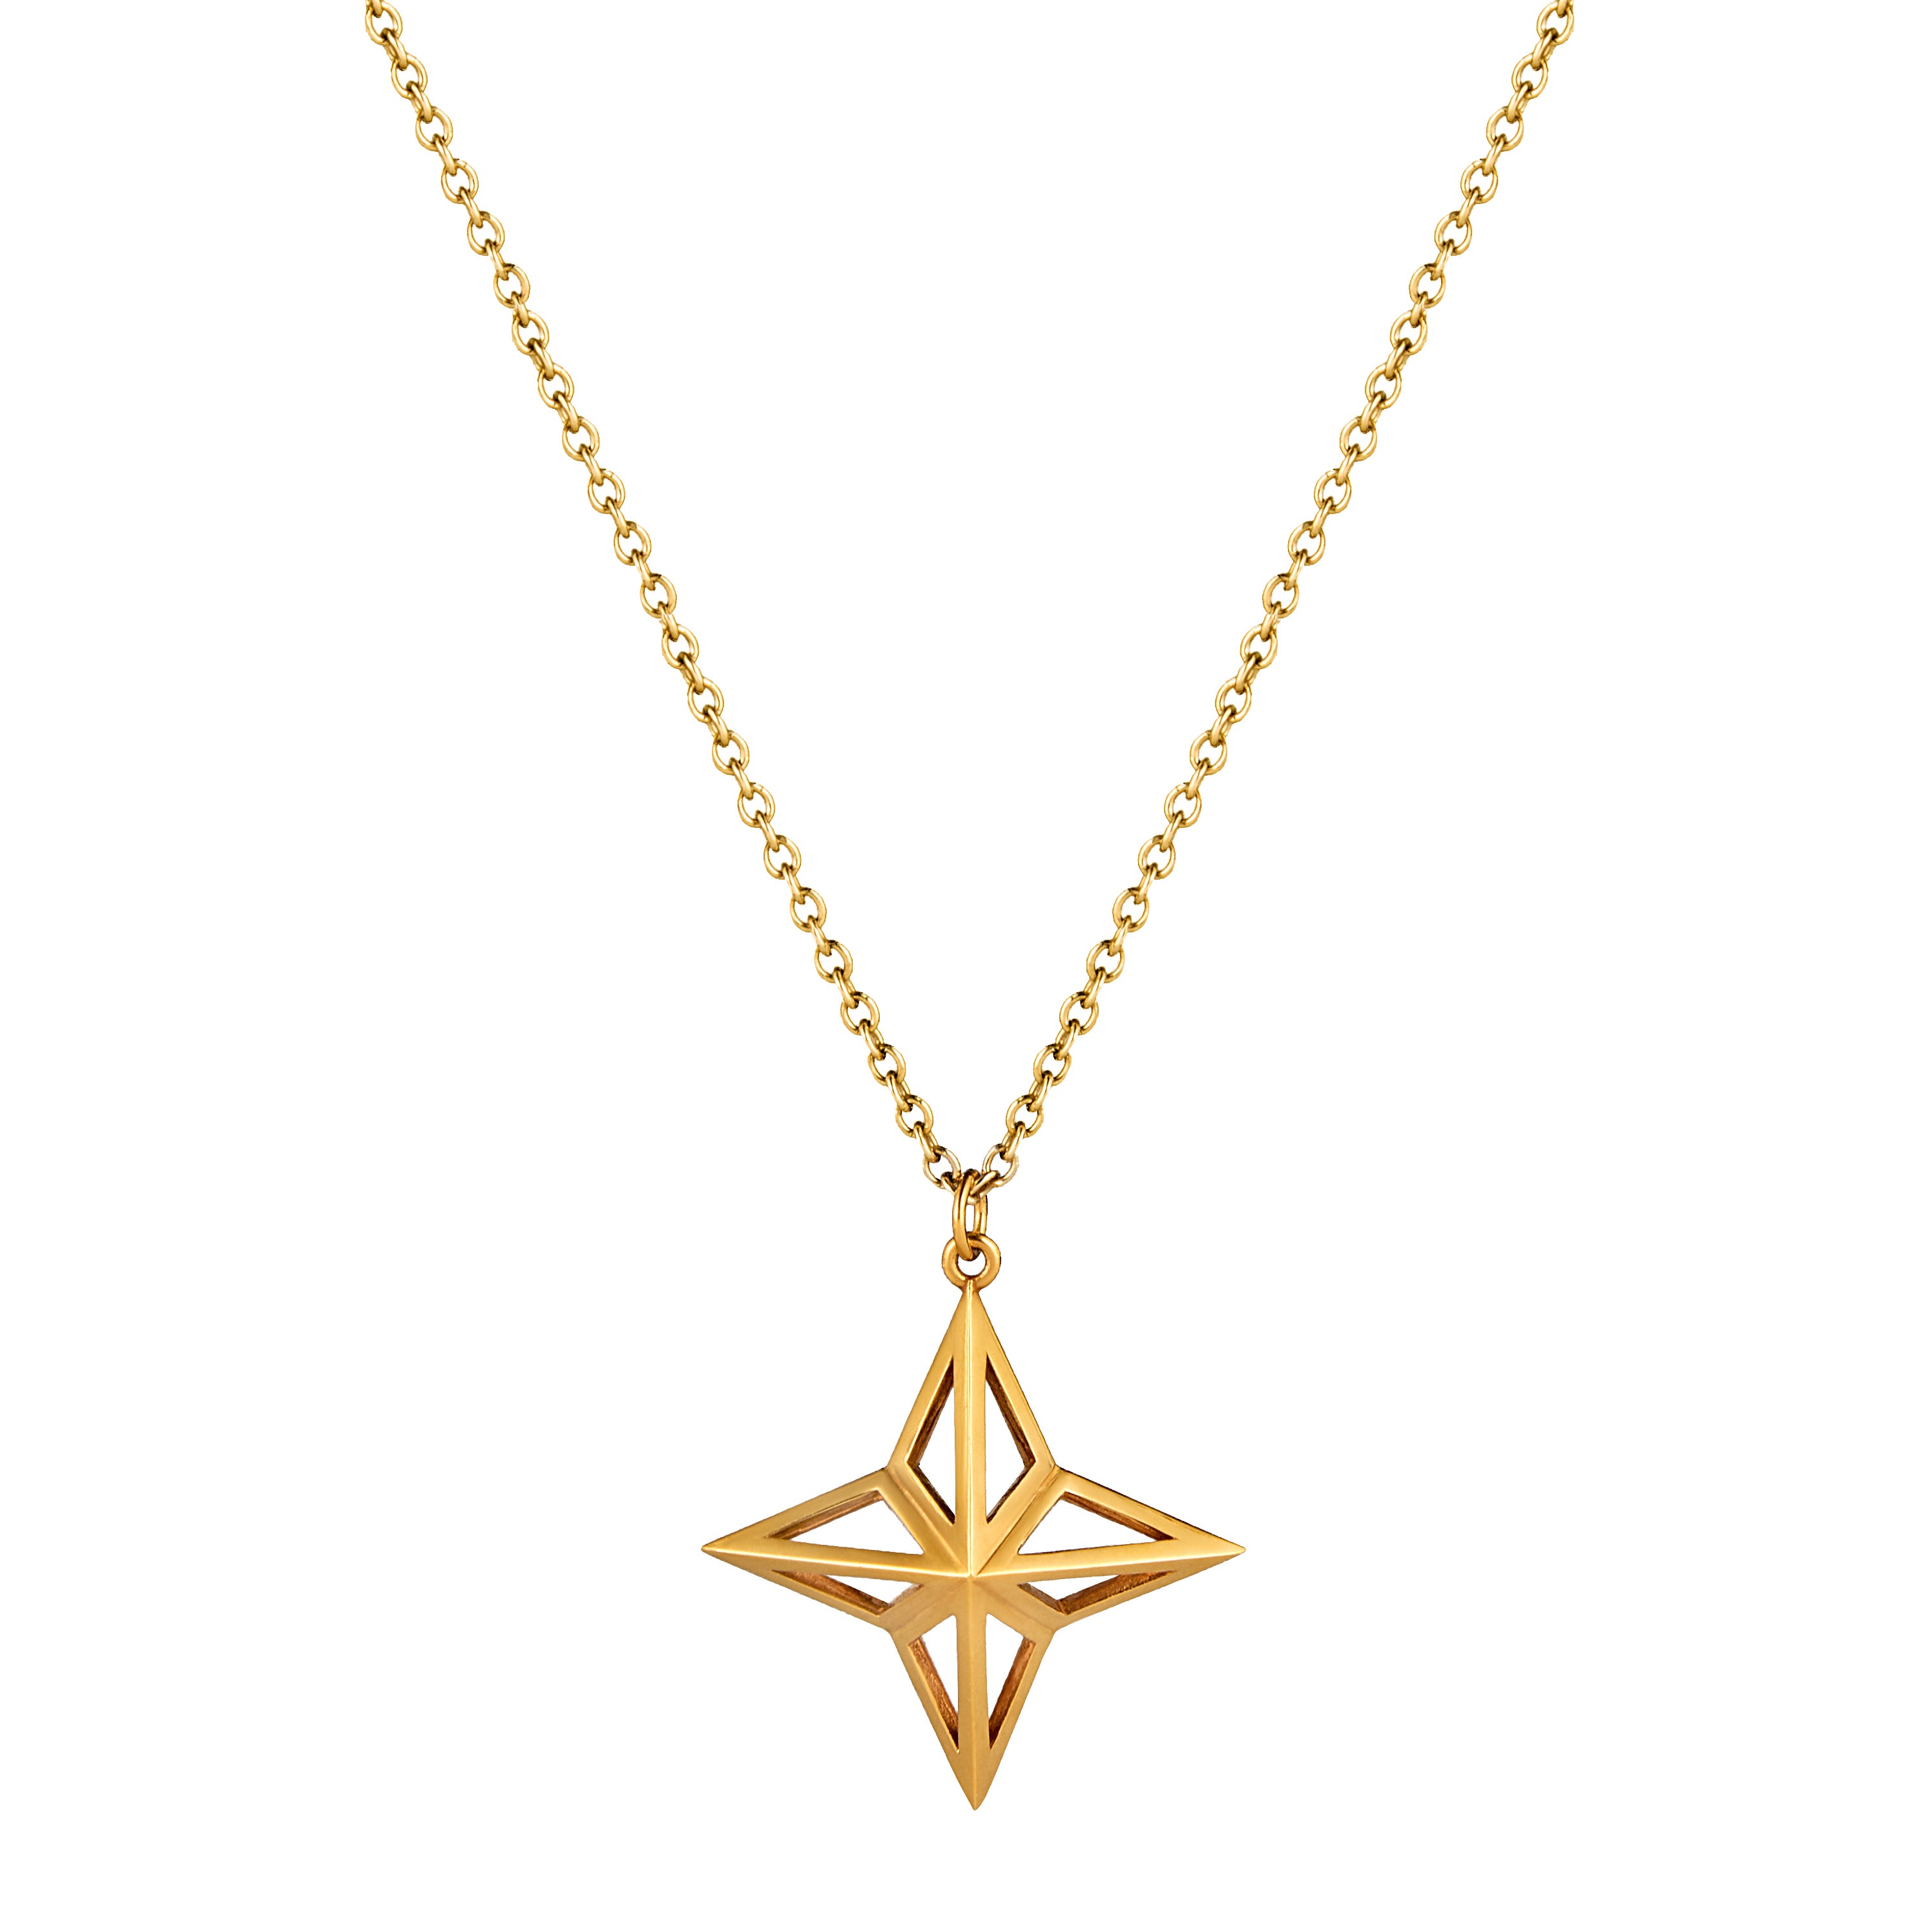 Gold Vermeil Theodora Pendant made of 8 interlocking triangles on gold chain on white background